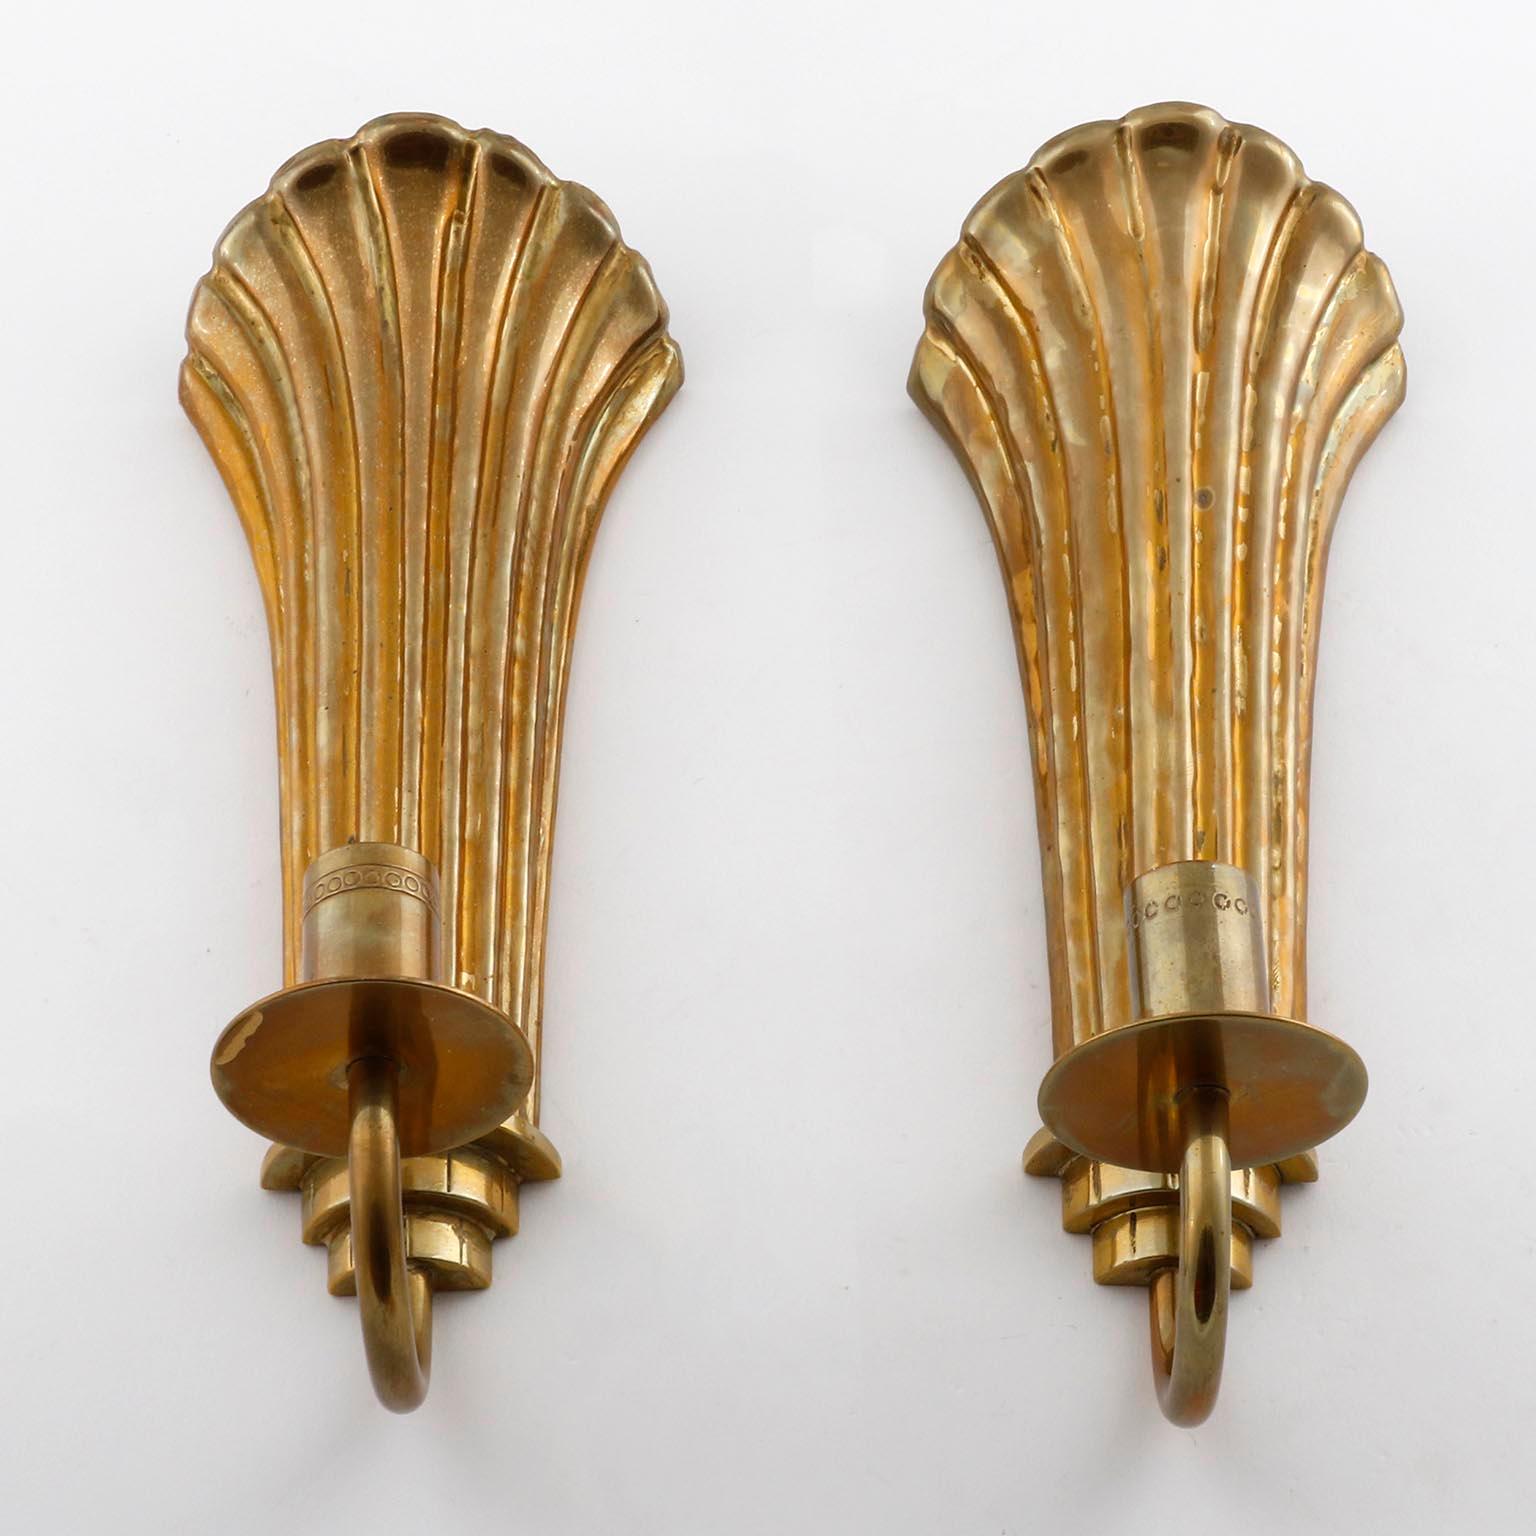 A pair of Art Deco brass one-light wall sconces designed by Lars Holmstrom for Konstsmide Arvika, Sweden, manufactured in 1920s-1930s.
The candle holders are in very good condition with lovely patina on brass.